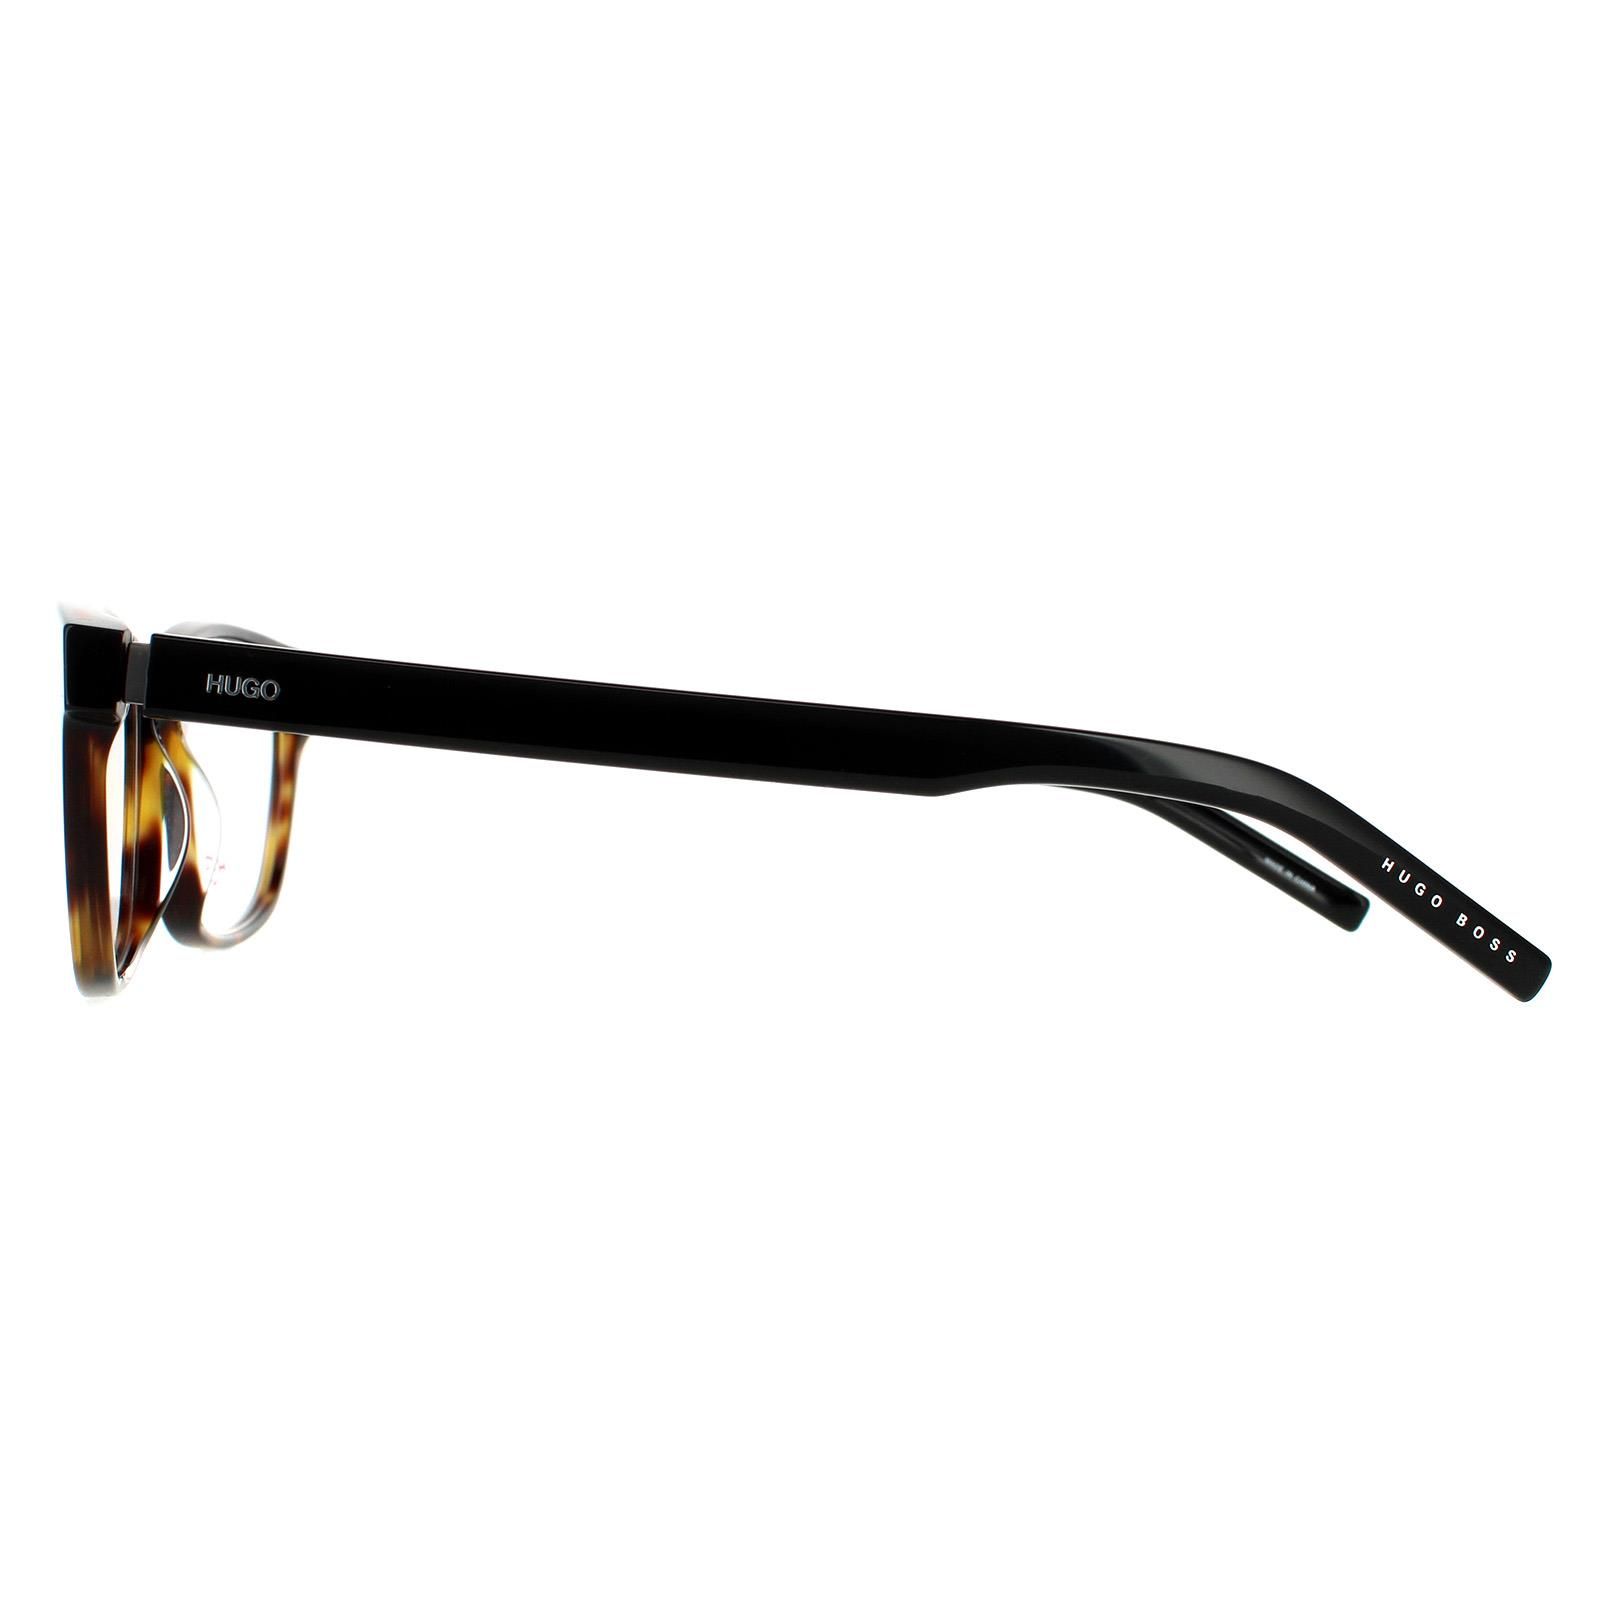 Hugo by Hugo Boss Rectangular Mens Dark Havana Glasses Frames HG 1115 are a classic square shape crafted from lightweight acetate. The Hugo Boss logo features along the temple for brand authenticity.